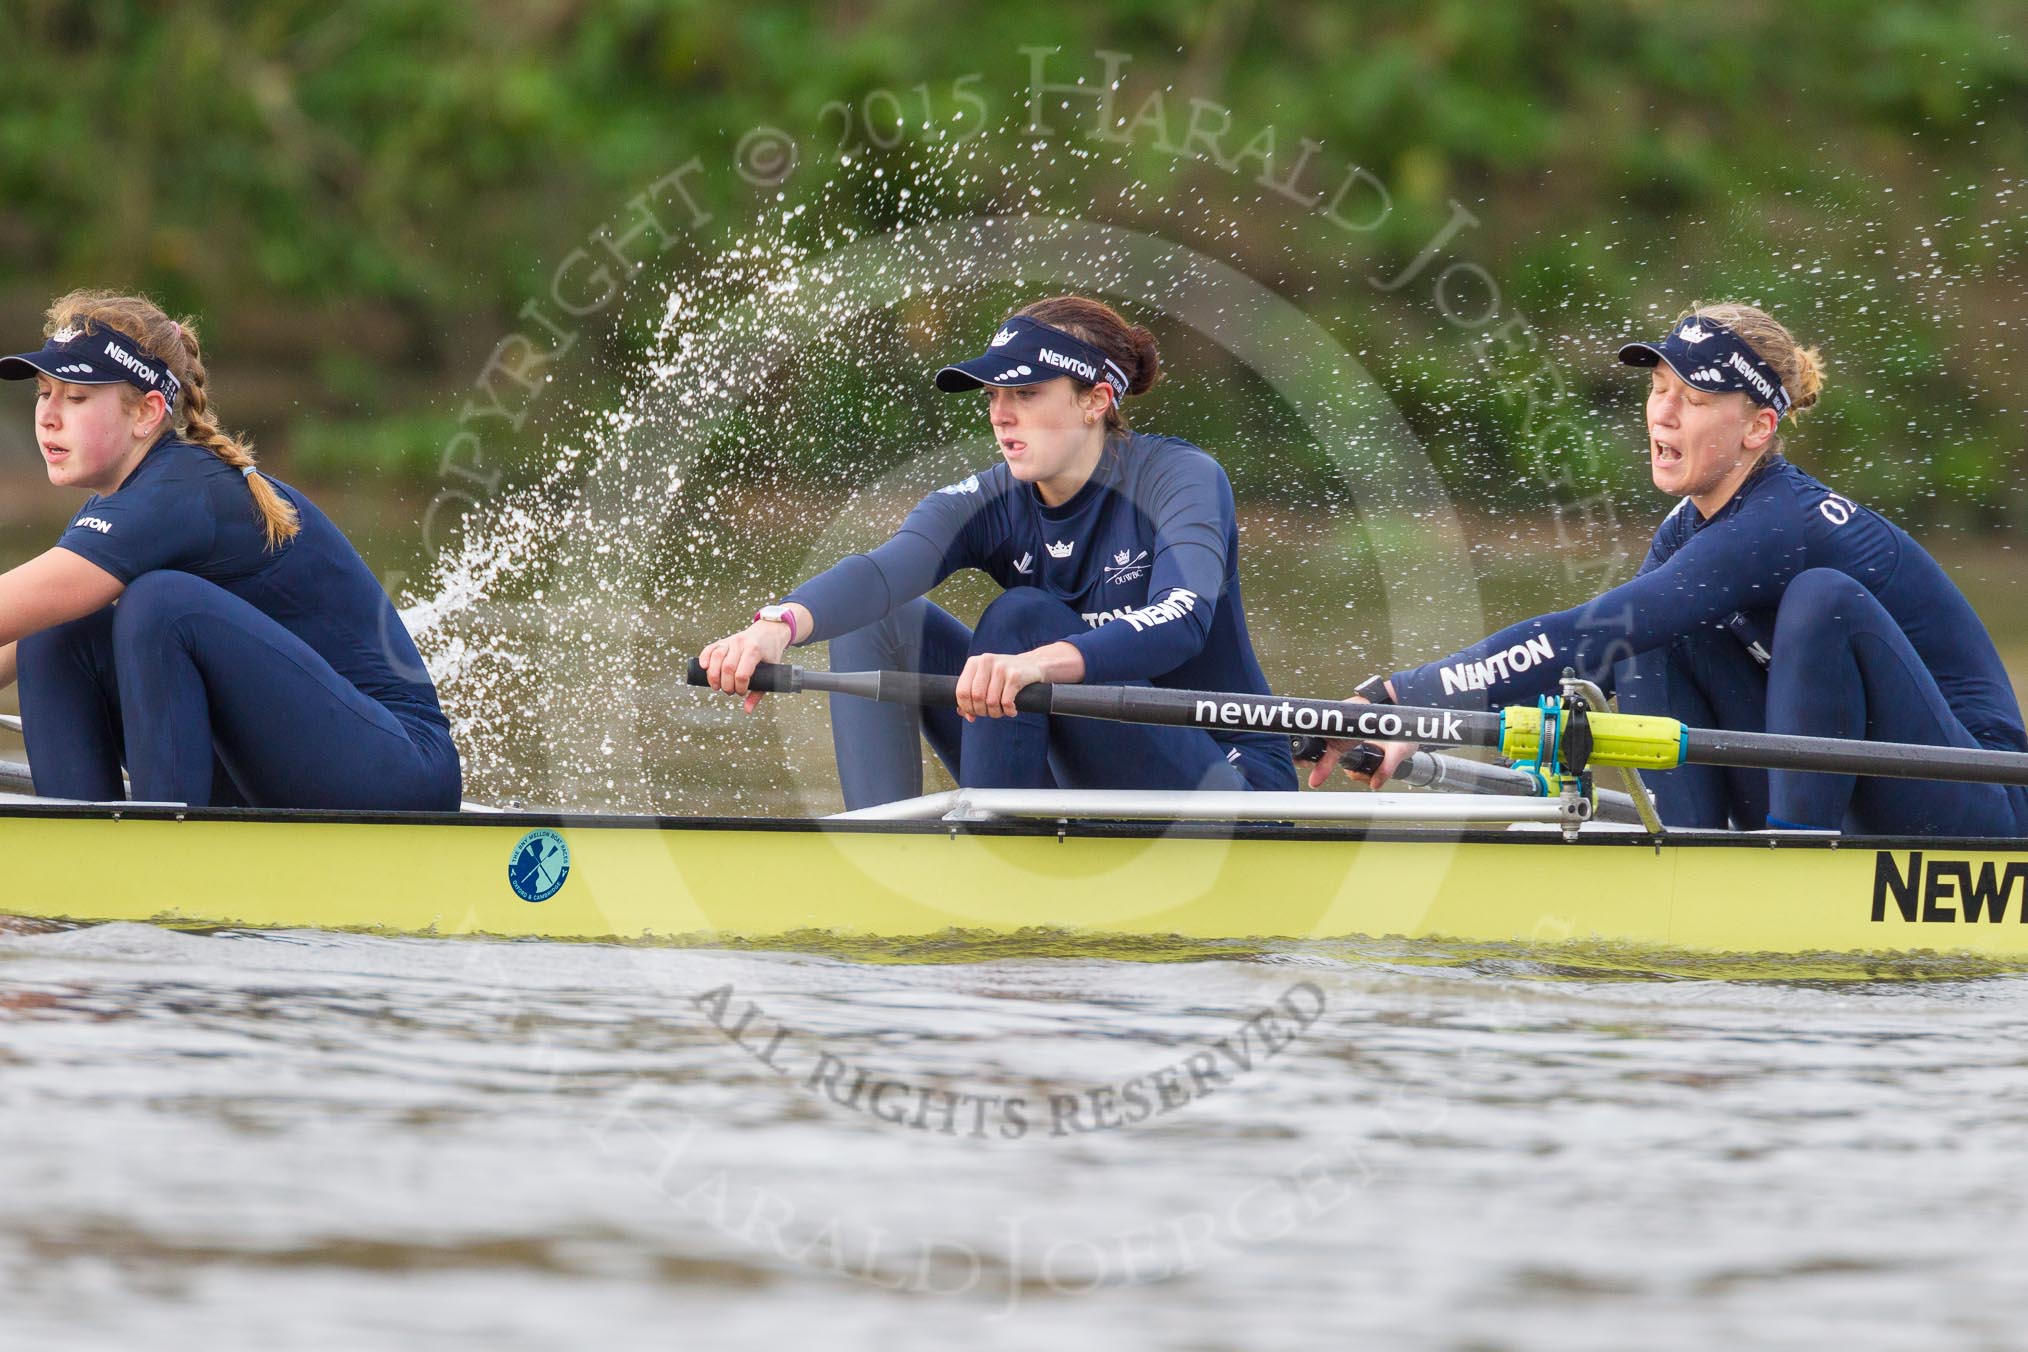 The Boat Race season 2016 - Women's Boat Race Trial Eights (OUWBC, Oxford): "Charybdis", here stroke-Kate Erickson, 7-Maddy Badcott, 6-Elo Luik.
River Thames between Putney Bridge and Mortlake,
London SW15,

United Kingdom,
on 10 December 2015 at 12:23, image #196